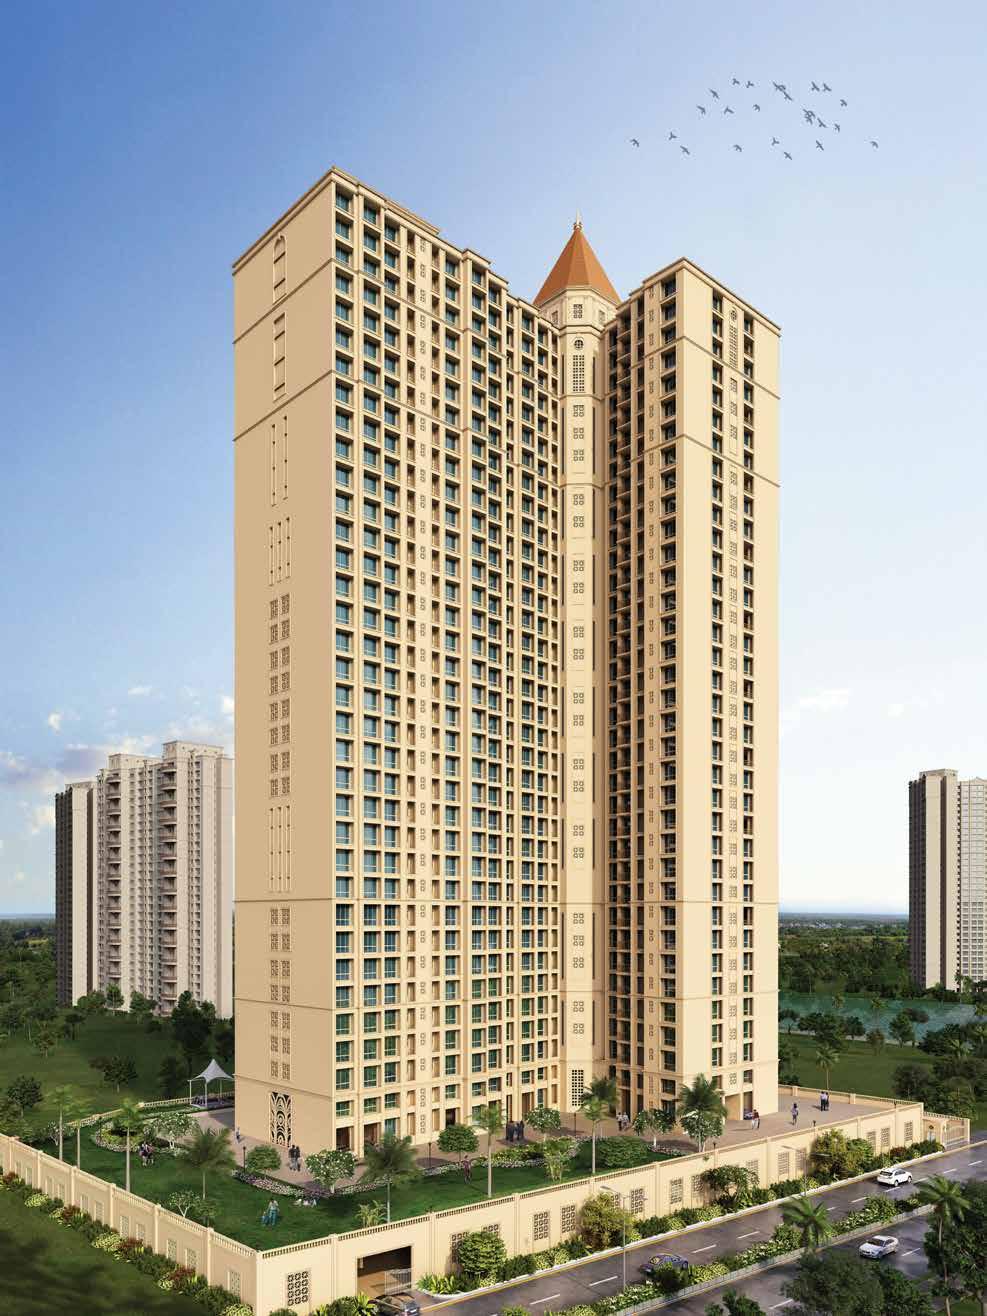 WELCOME TO EAGLERIDGE Hiranandani Estate, Thane 2, 2.5 & 3 BHK Apartments LIVE THE SERENE LIFE Experience much more in life than just the hustle-bustle of the city.